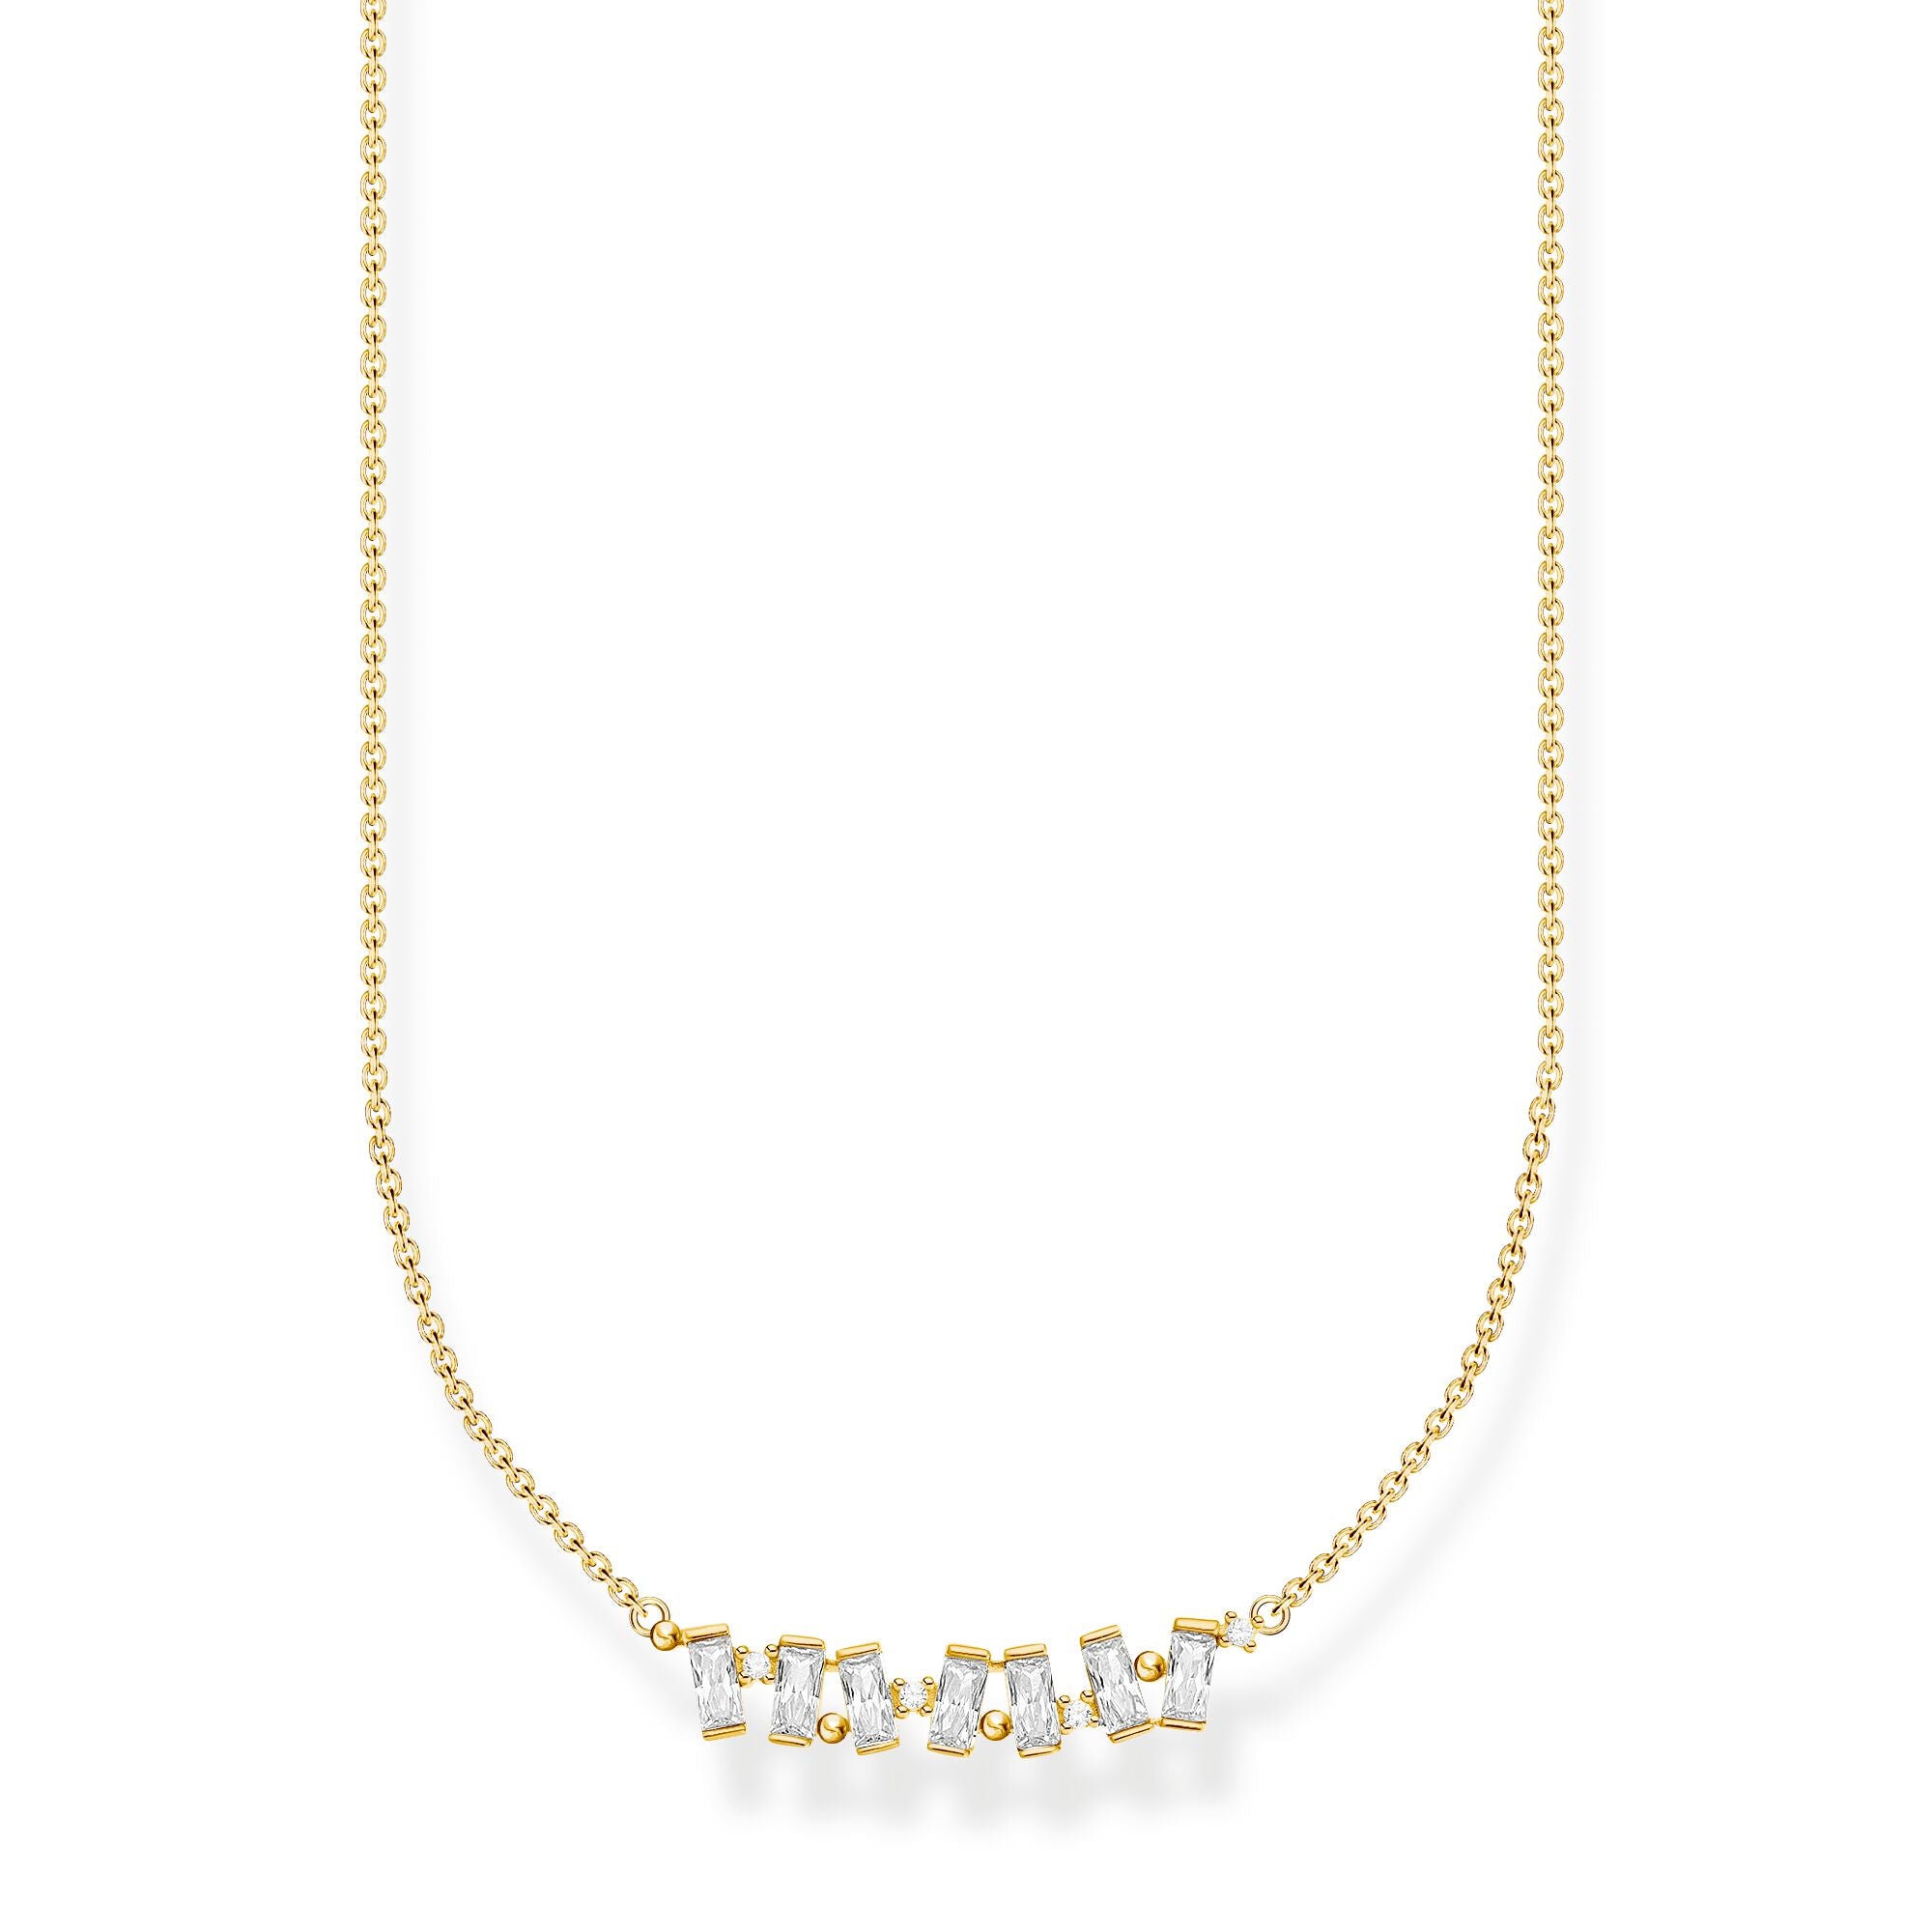 18 karat yellow gold plated sterling silver necklace with 7 baguette stones by Thomas Sabo